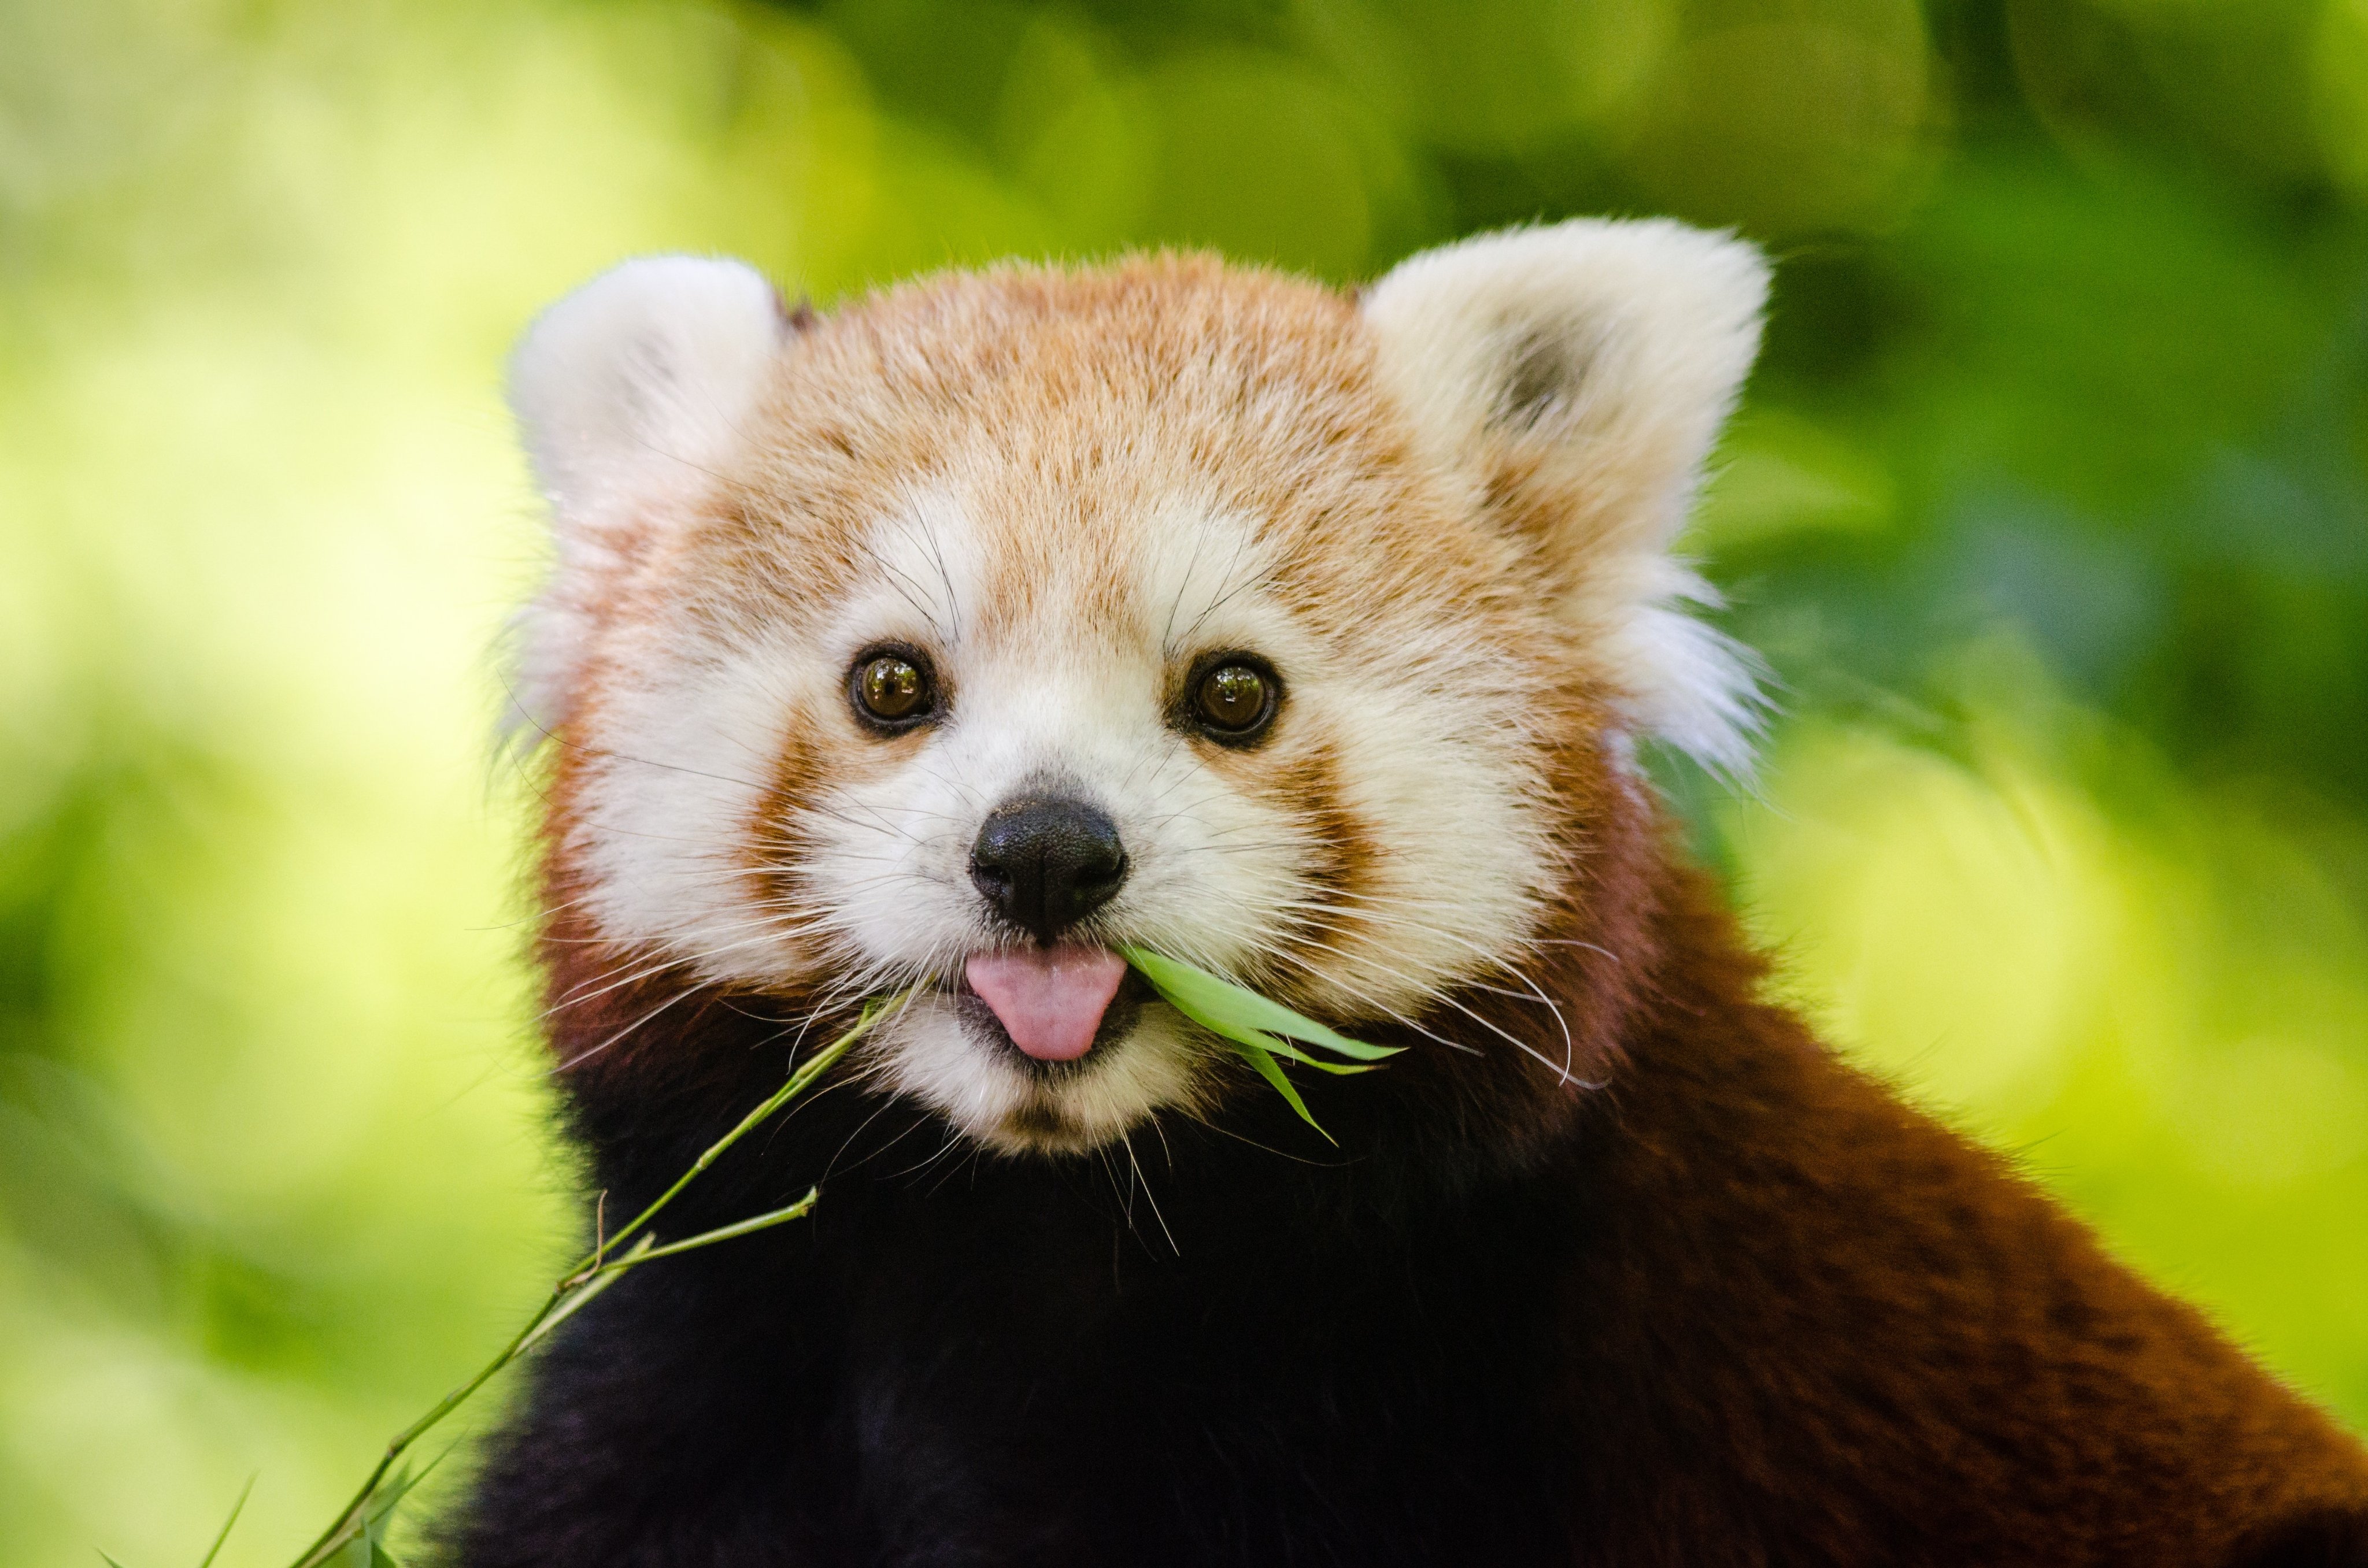 Animal Planet on Twitter: "Happy #InternationalRedPandaDay! pandas love eating bamboo, and their diet mostly of it! 🎍 📷:Nguia Charrad / EyeEm #POTD #PhotoOfTheDay #NationalRedPandaDay #RedPanda https://t.co/kX4W2spNCA" / Twitter